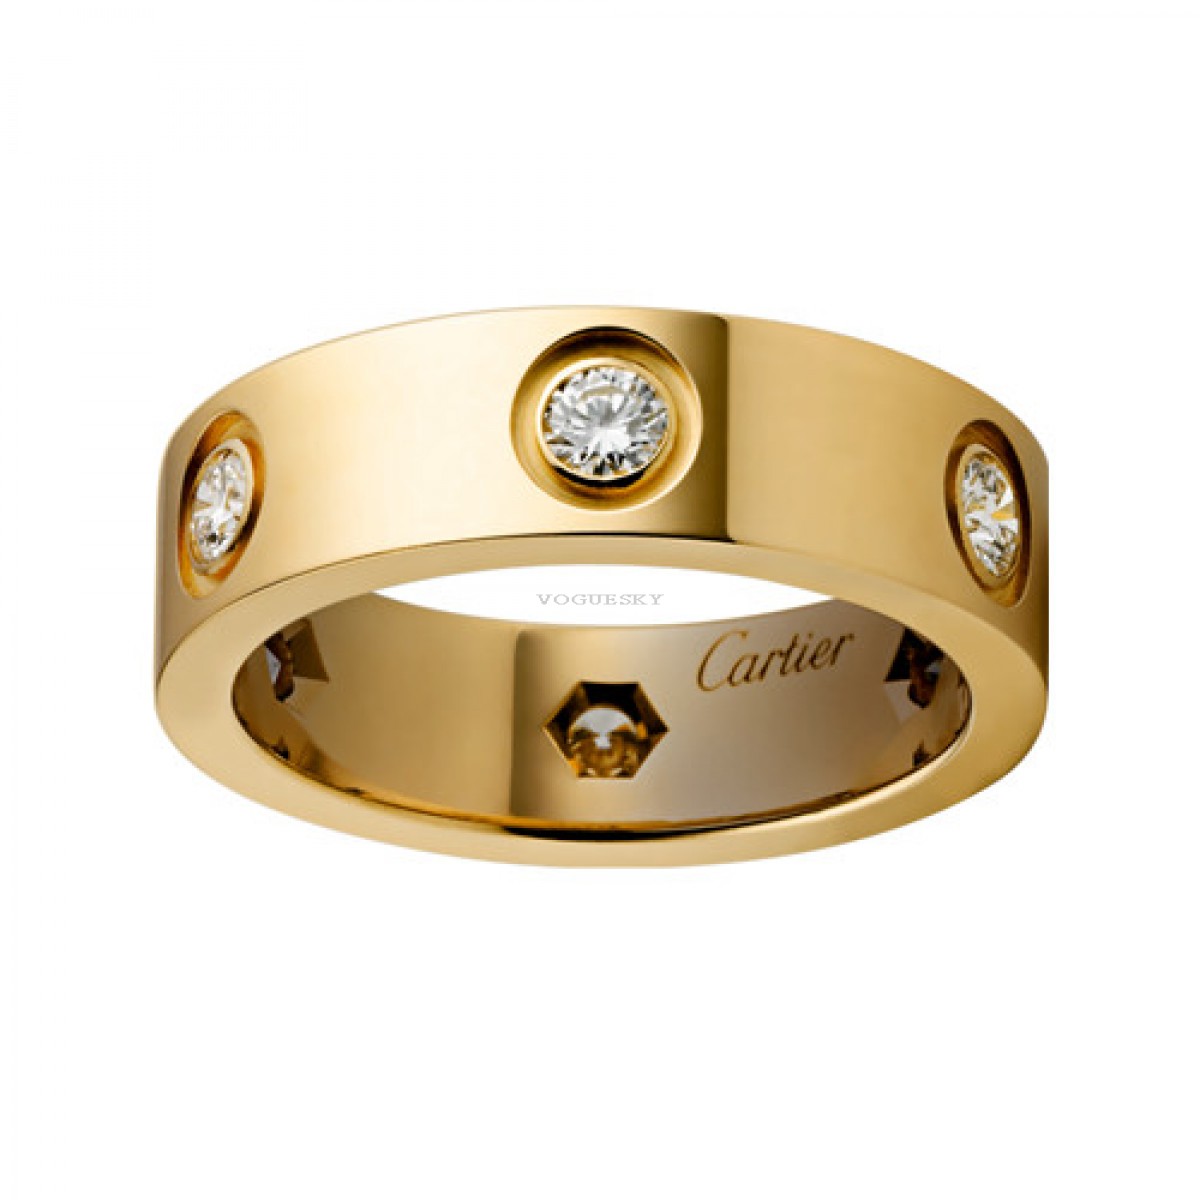 Cartier 18K White Gold 6 Diamond Love Band Ring Size 6 | Cartier | Buy at  TrueFacet